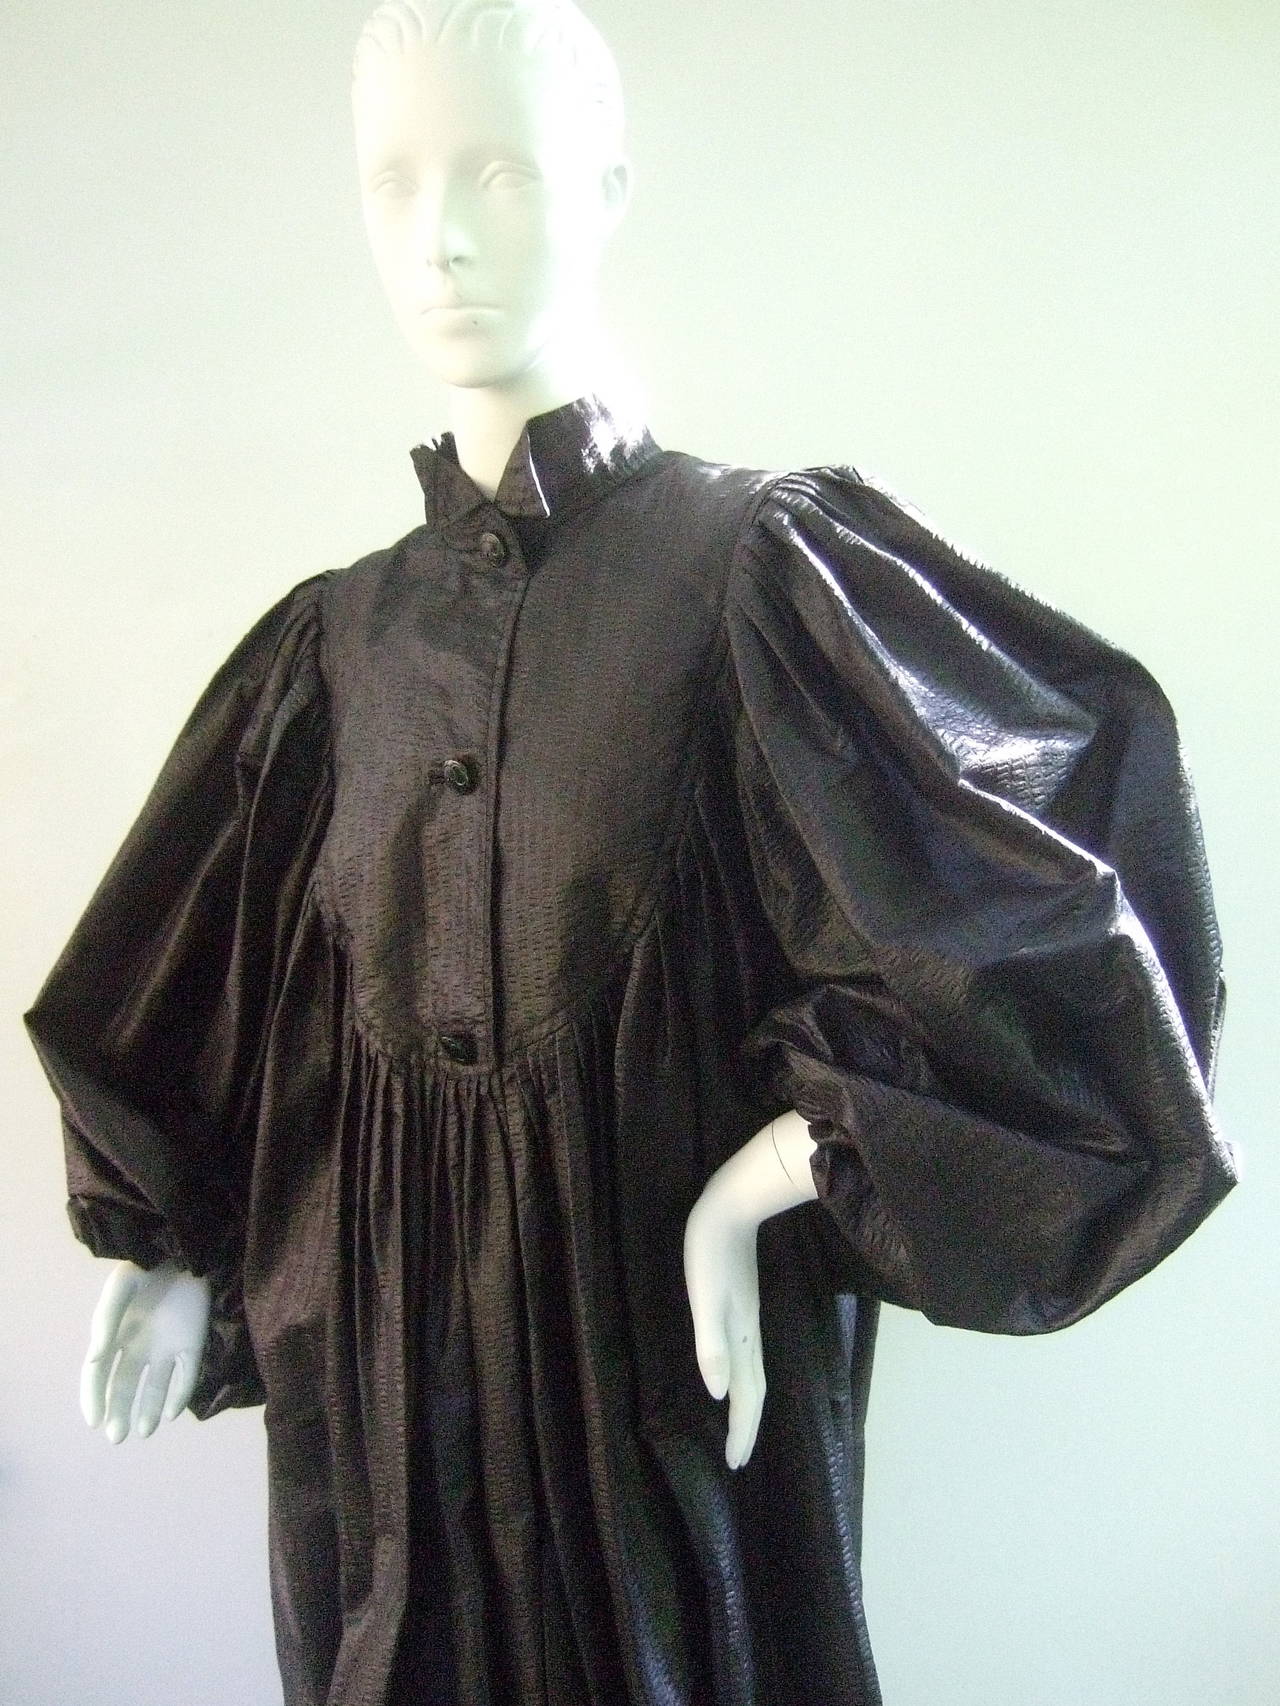 Galanos Avant-garde black voluminous light weight evening coat c 1970
The unique high fashion coat is designed with light weight sheer fabric that resembles tissue paper. The silhouette is enhanced with voluminous billowy poet style sleeves. The